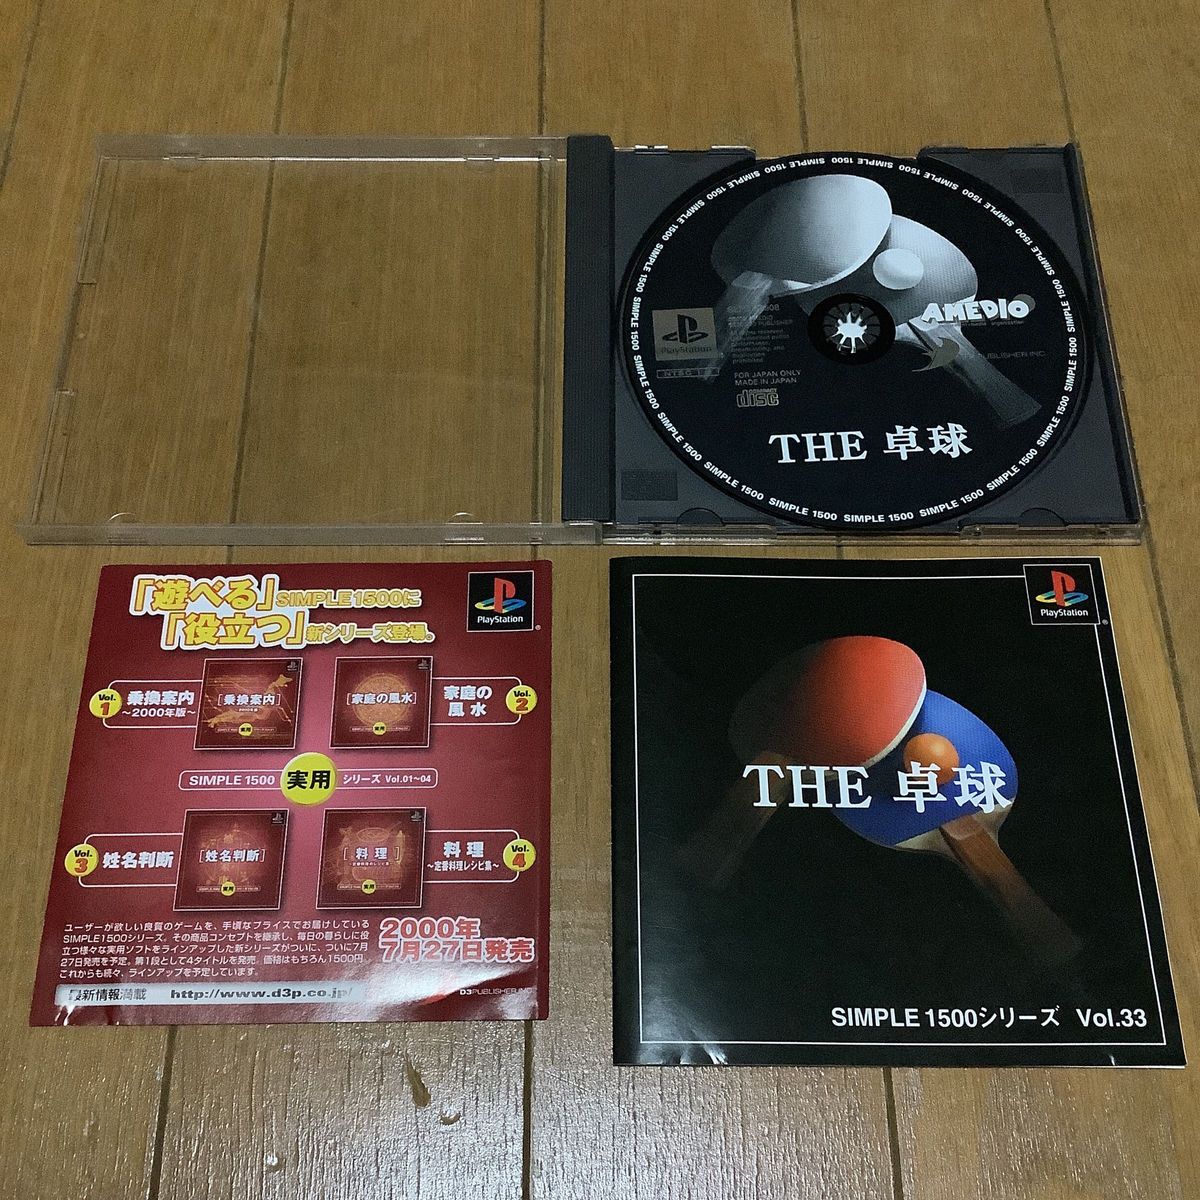 SIMPLE1500シリーズ Vol.10 THE ビリヤード　Vol.33 THE 卓球　まとめ売り PS PS1